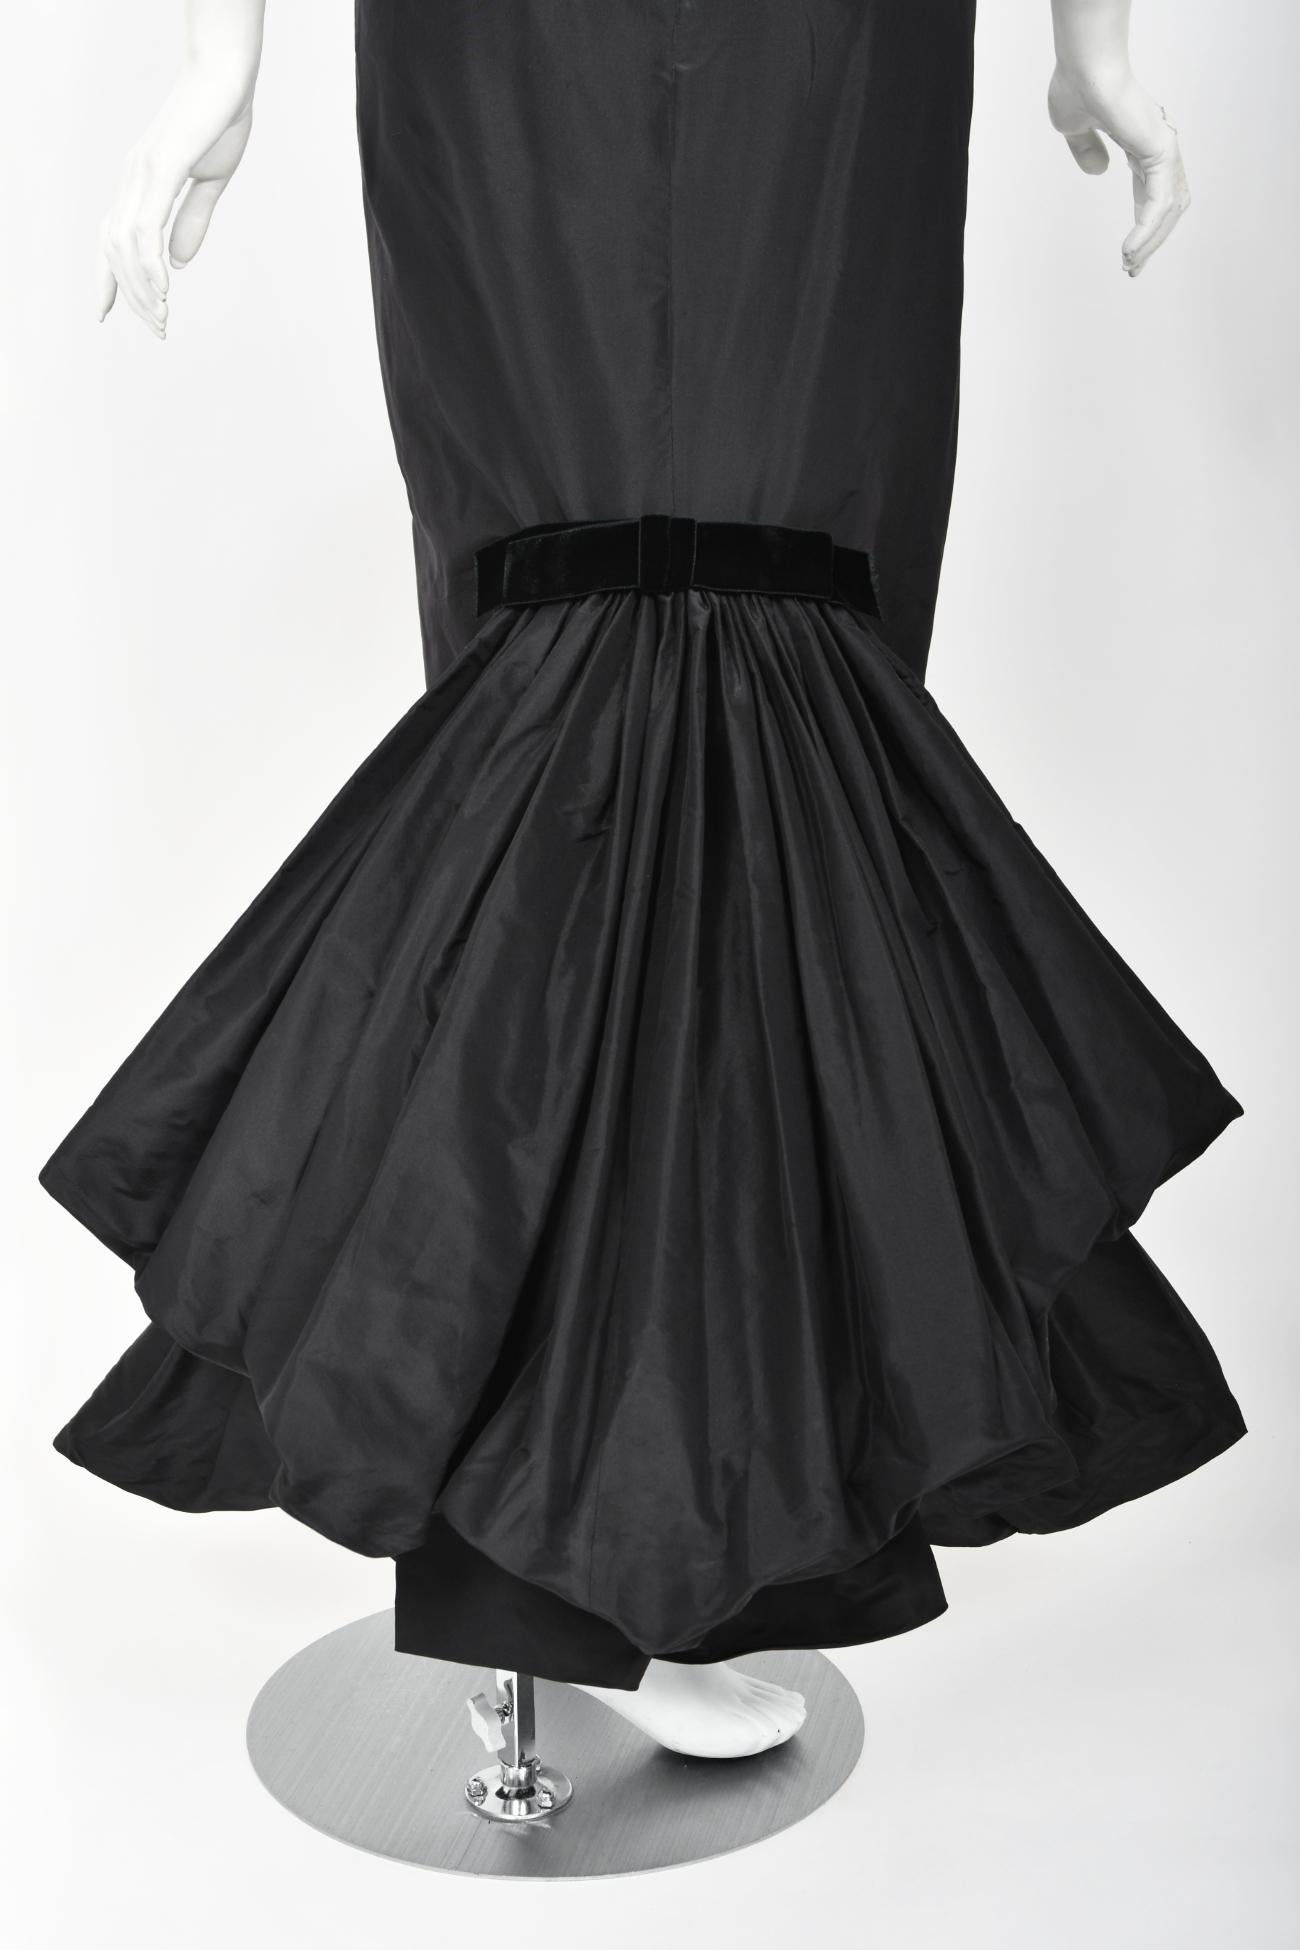 Vintage 1950's Philip Hulitar Old Hollywood Black Silk Hourglass Fishtail Dress For Sale 8